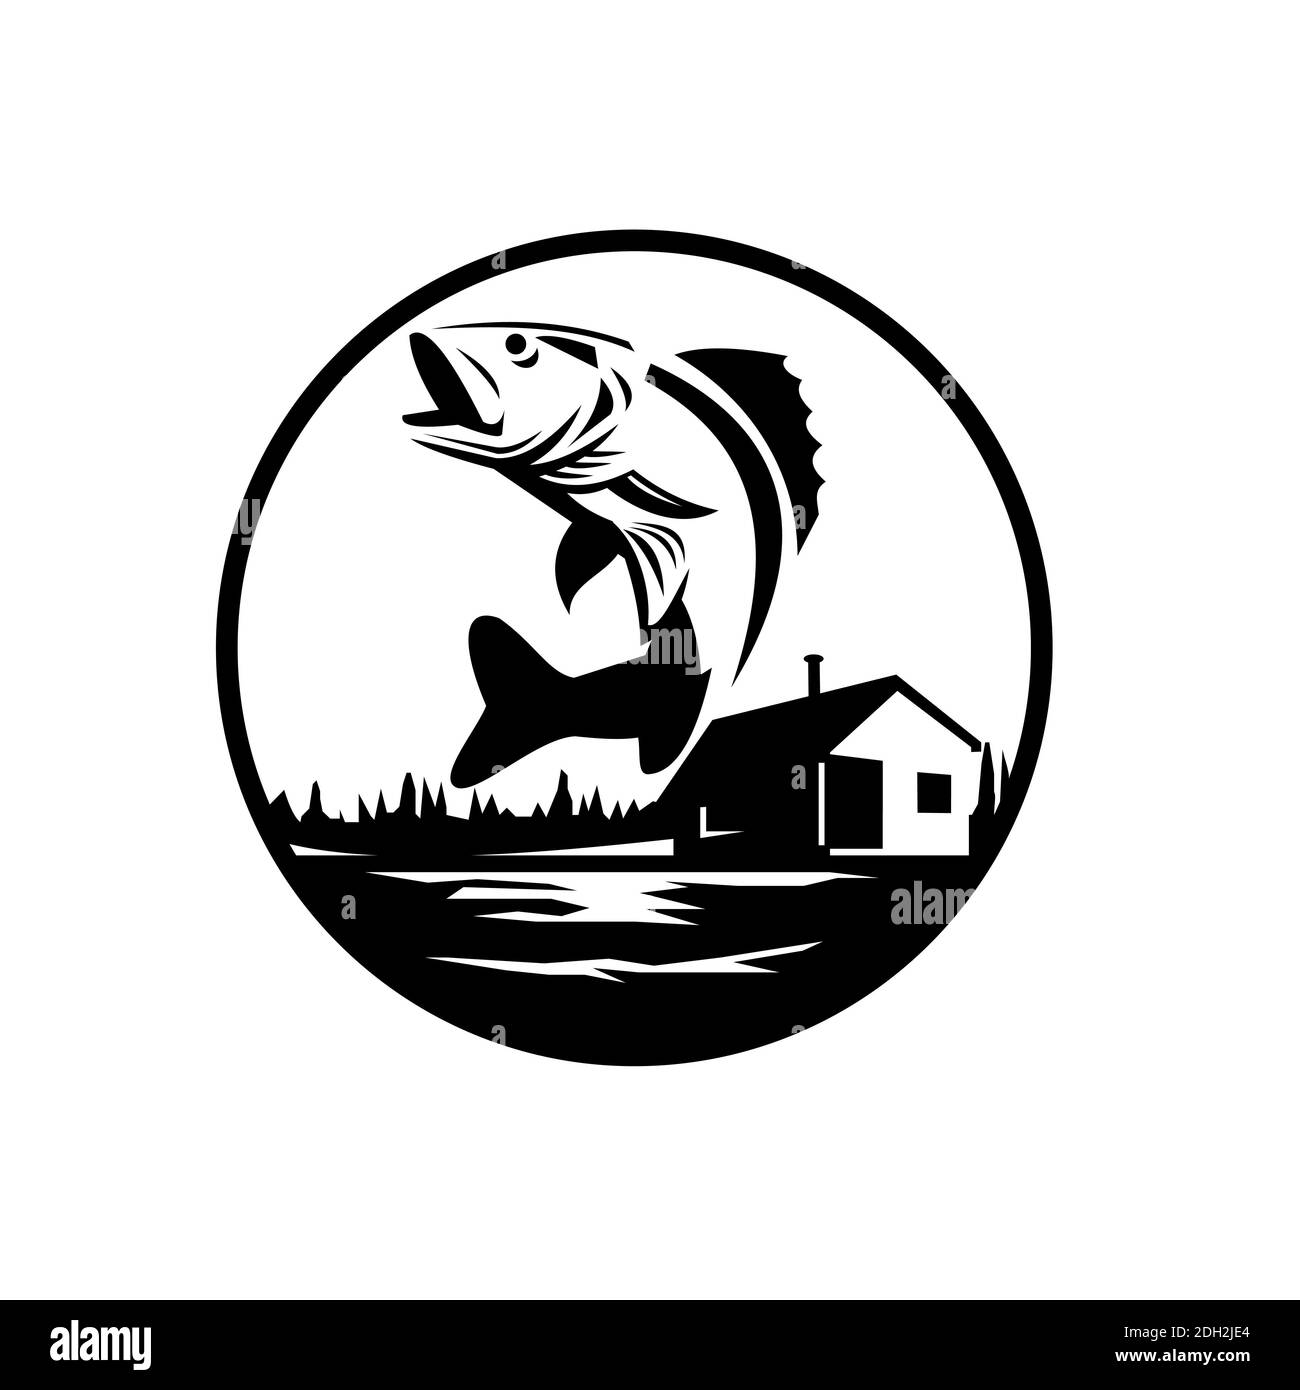 Walleye Fish Jumping on Lake With Lodge Cabin Circle Black and White Retro Stock Photo